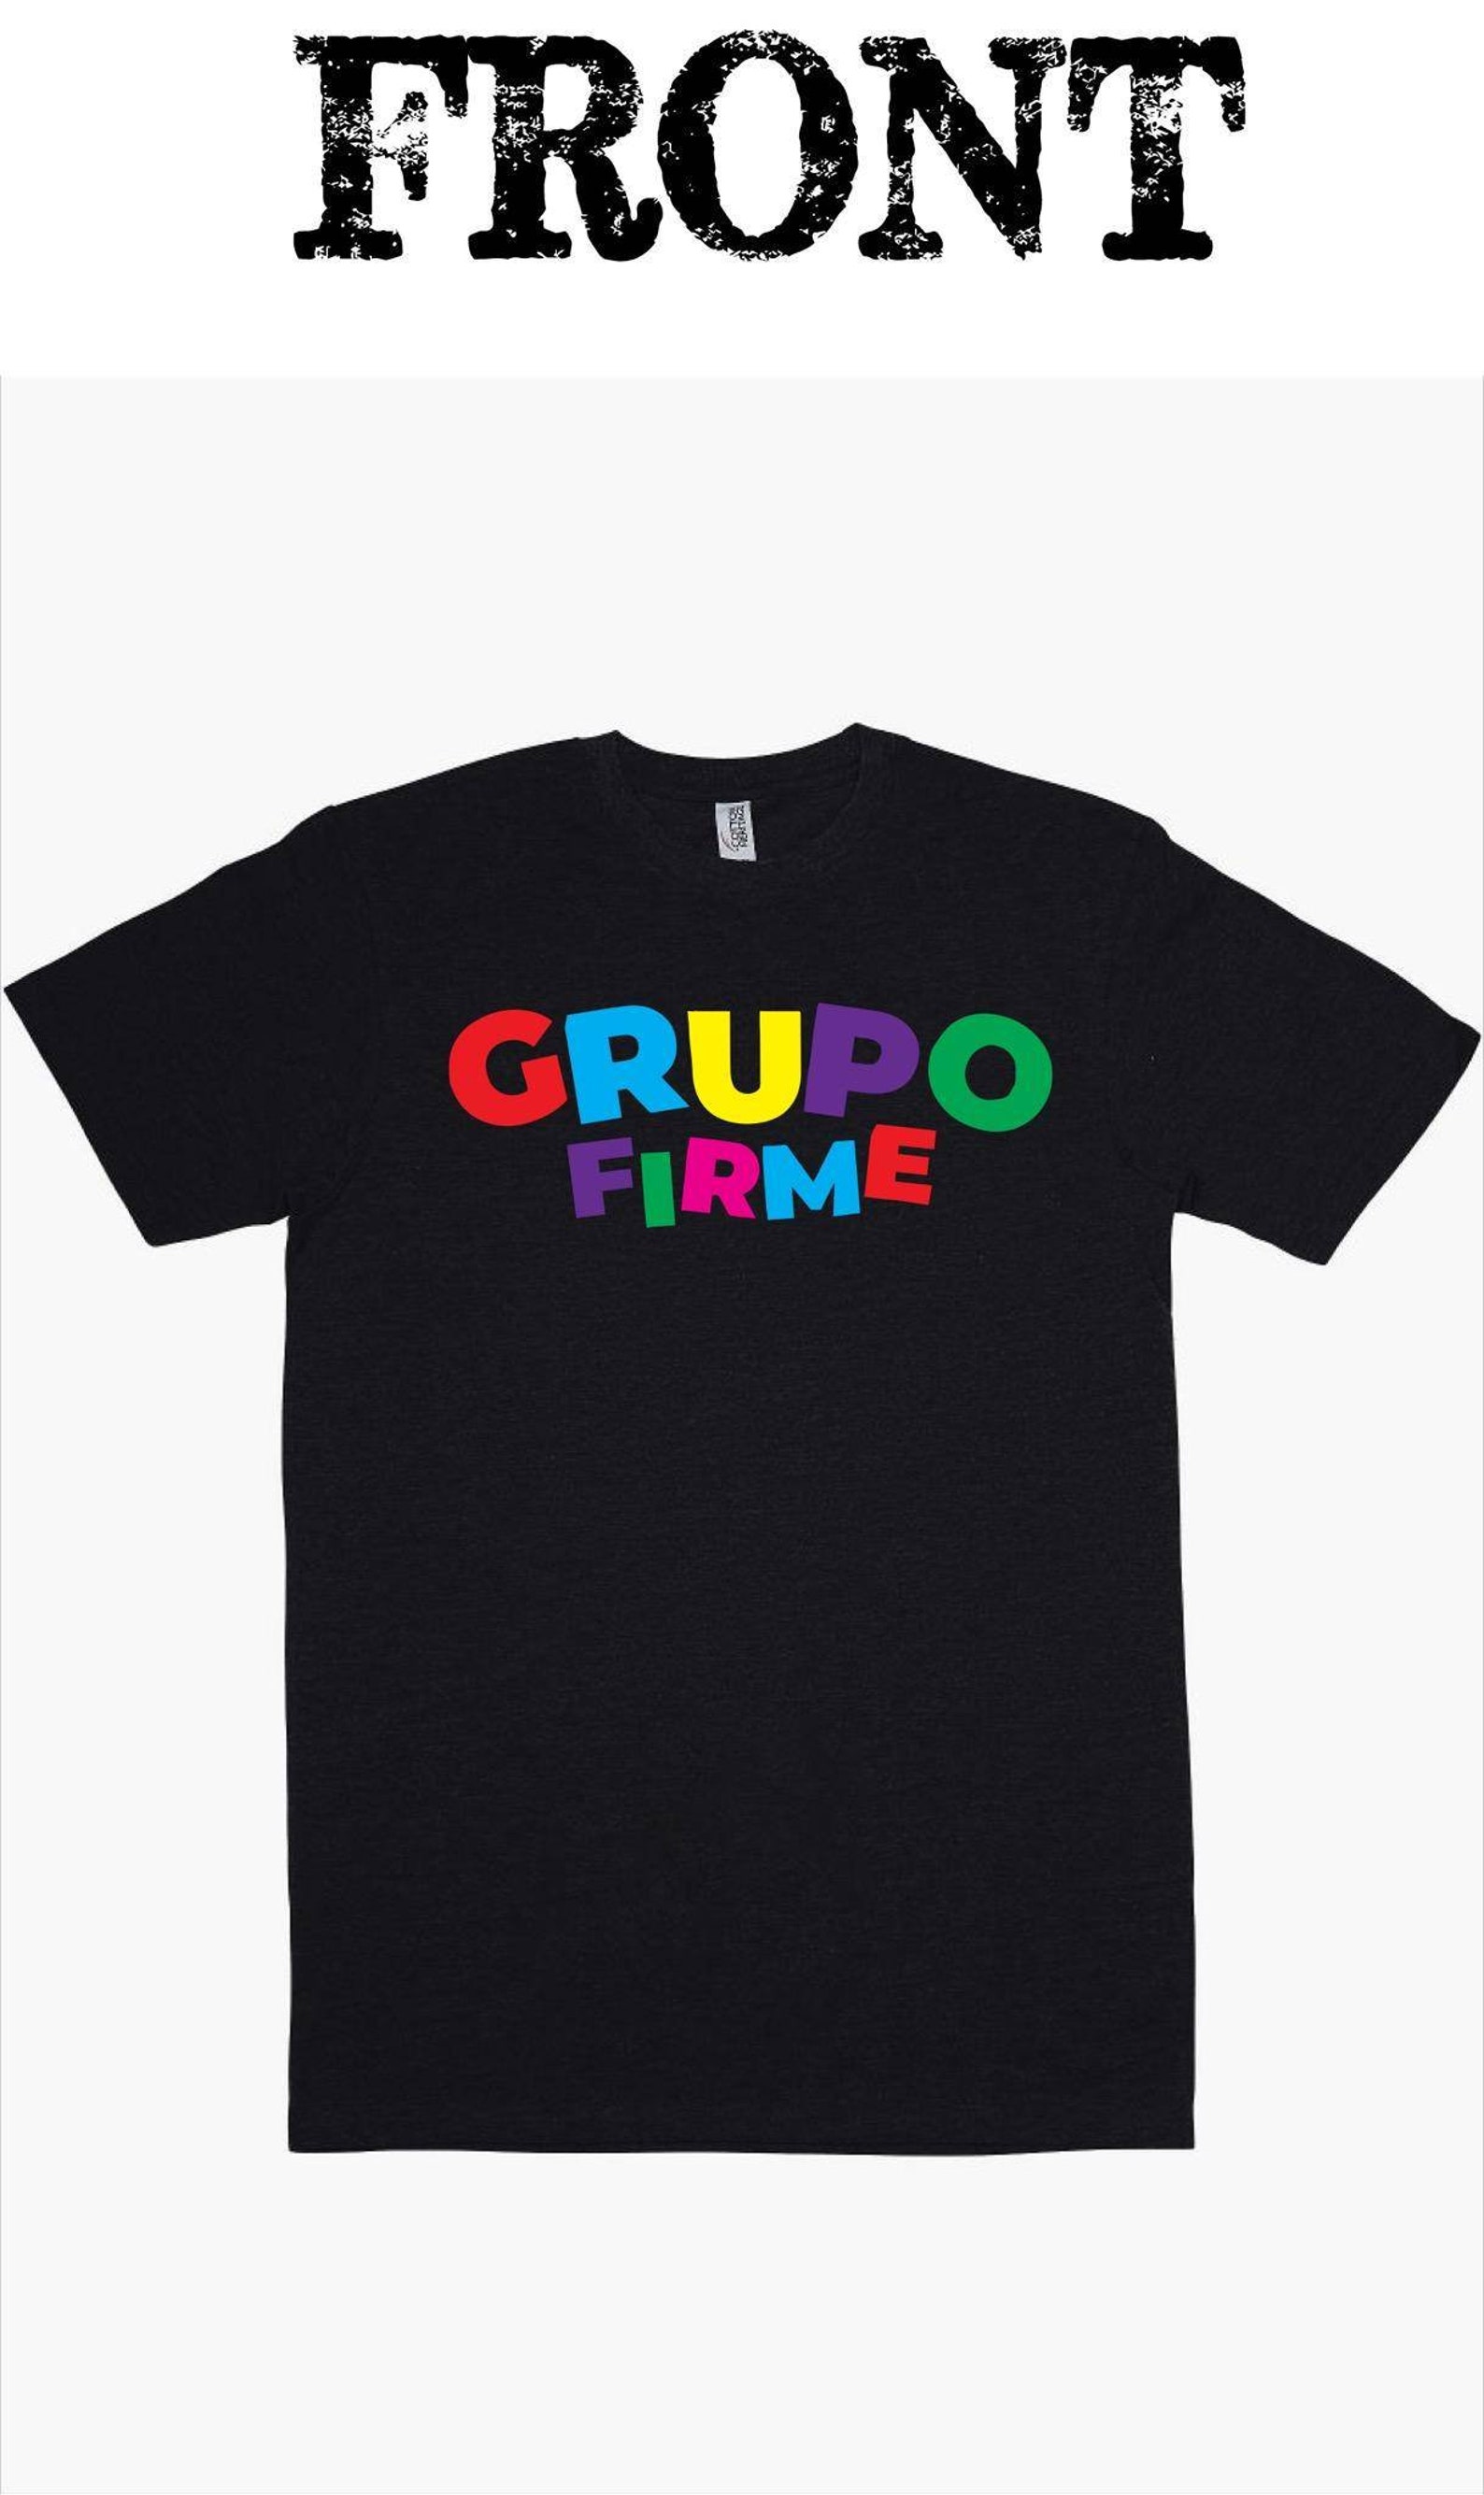 Grupo Firme Tshirt S5XL New Grupo Firme Fast Shipping Etsy